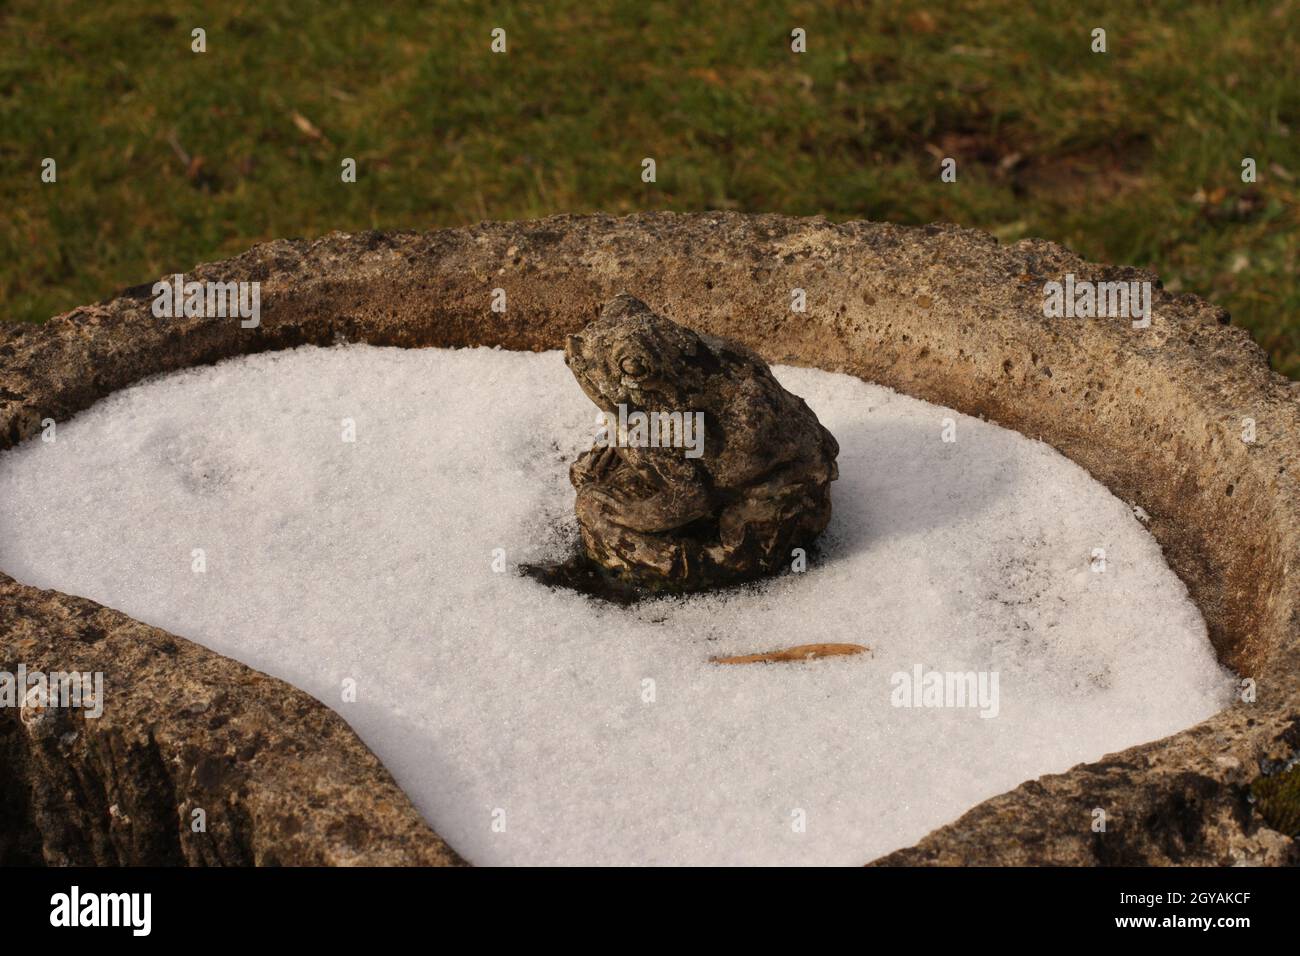 Stone bird basin with stone frog and frozen water, England Stock Photo